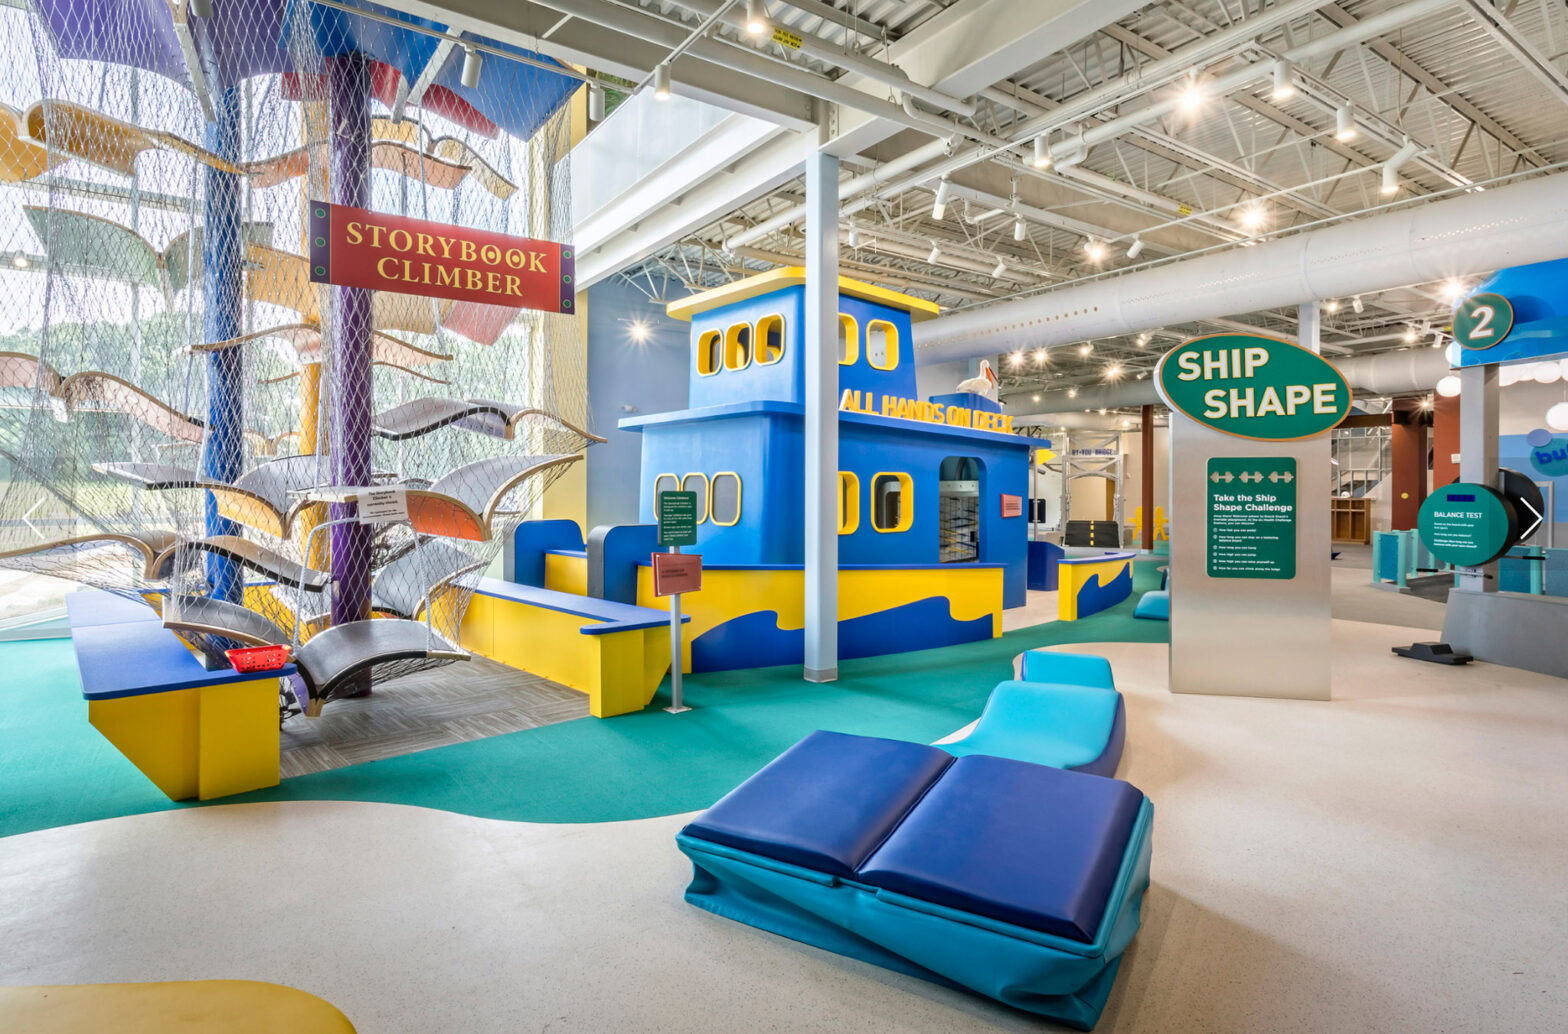 An image of the All Hands On Deck playing area.